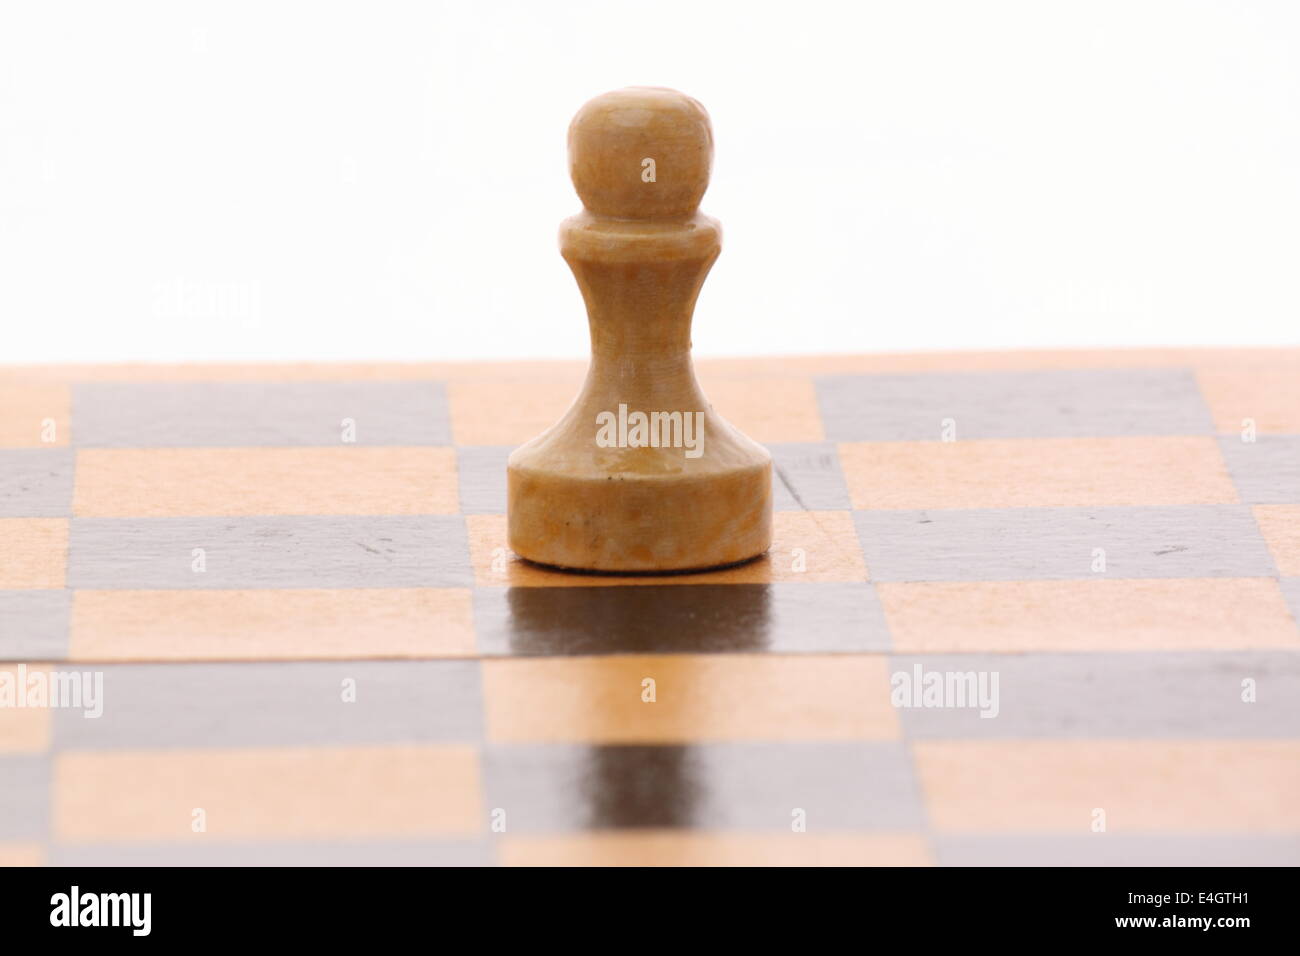 pawn on a wooden chessboard over white Stock Photo